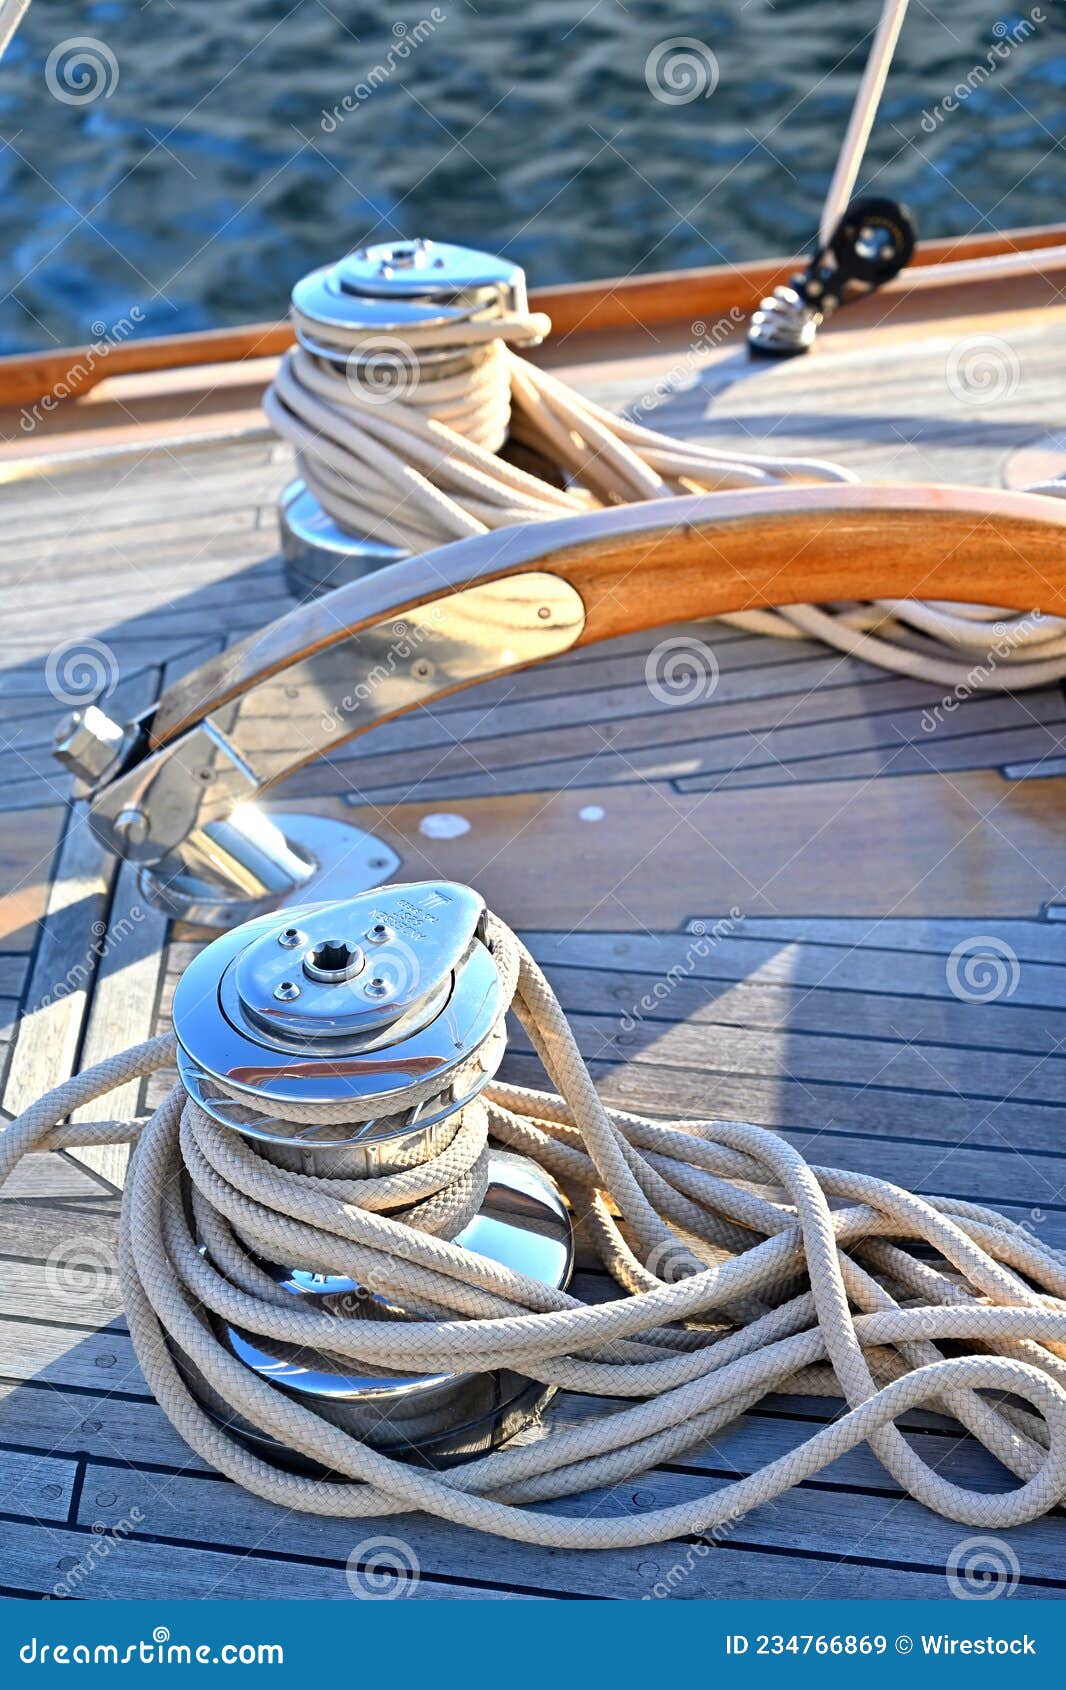 classic yacht winches